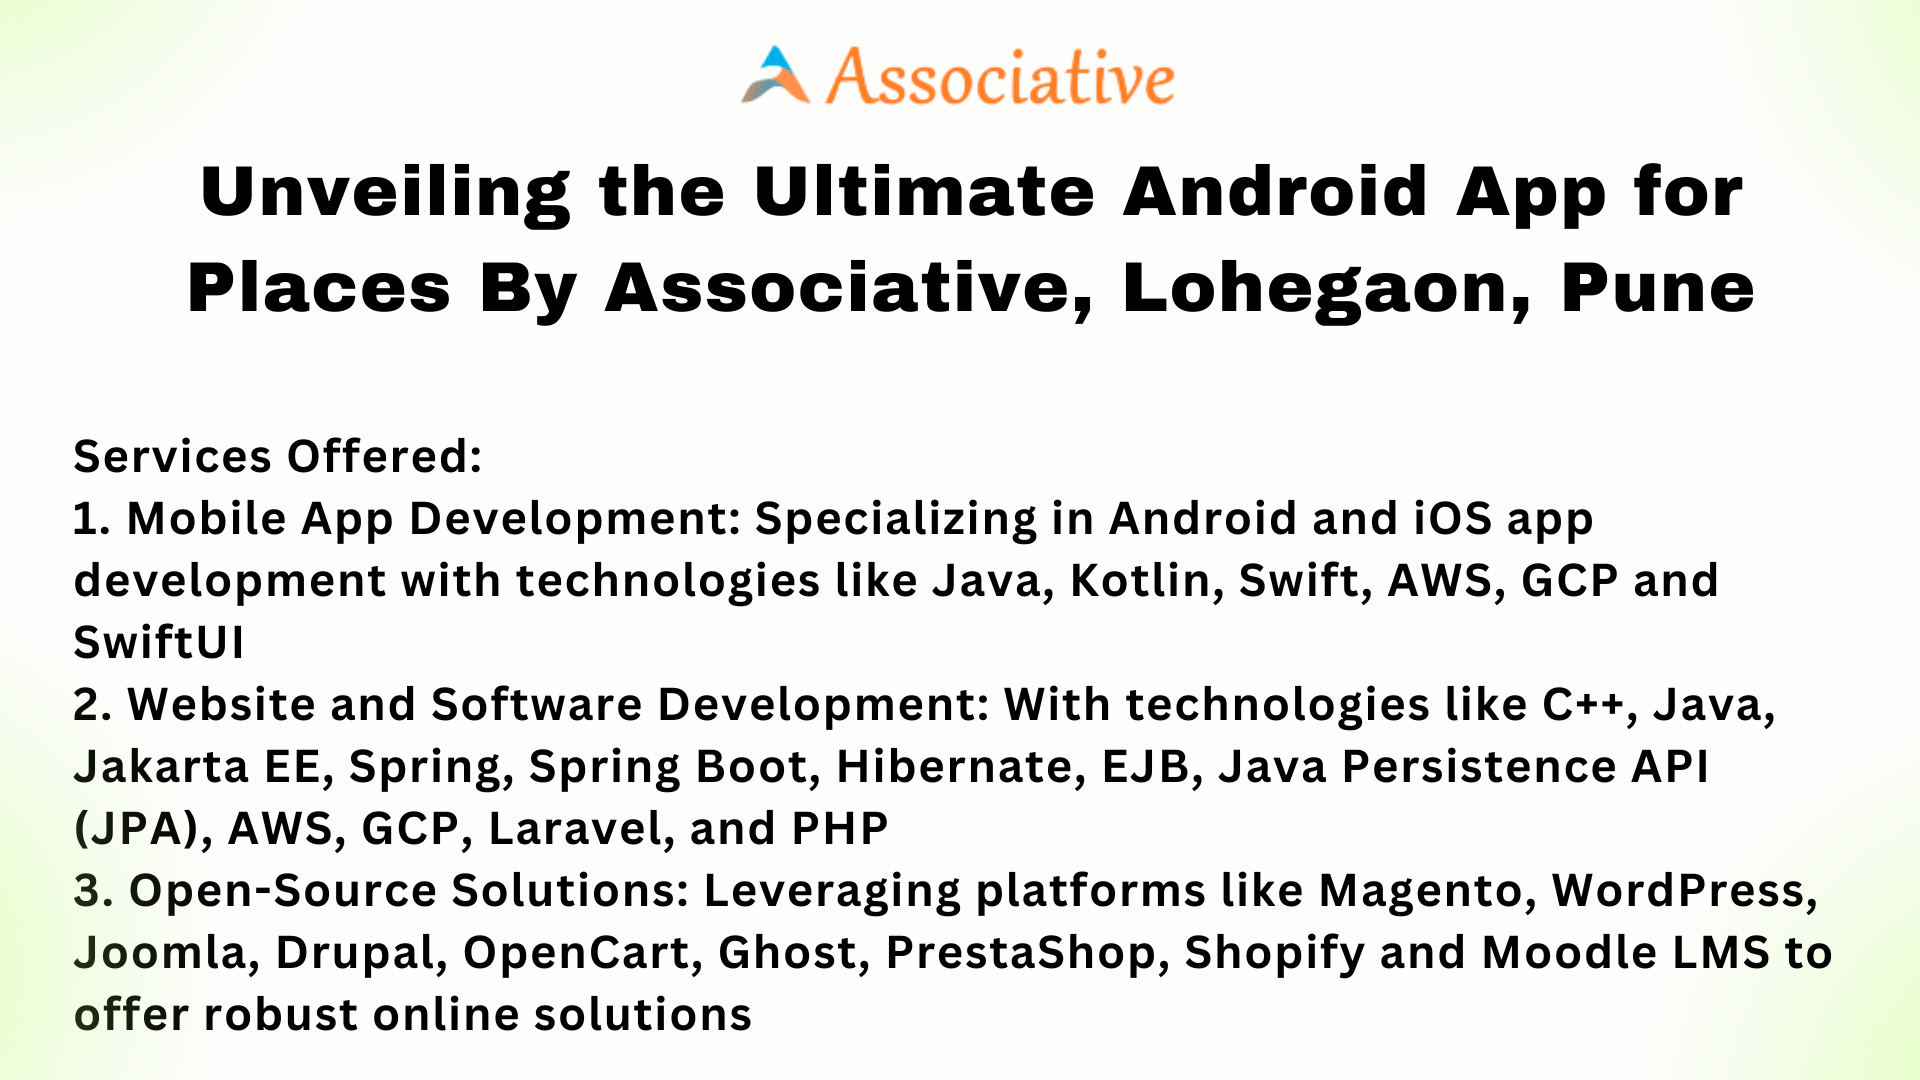 Unveiling the Ultimate Android App for Places By Associative, Lohegaon, Pune